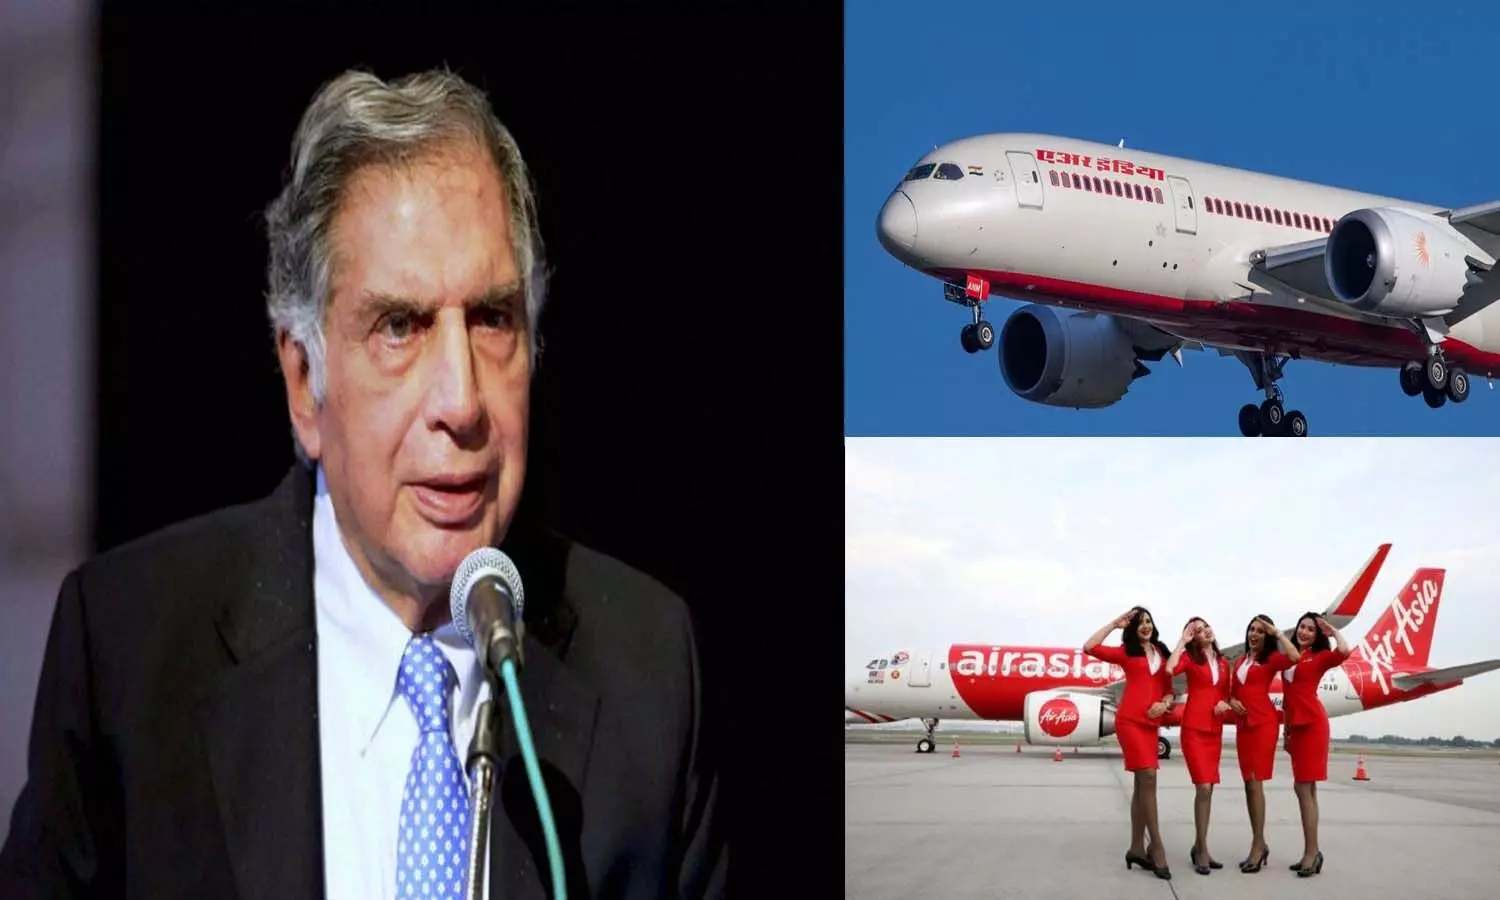 After Air India, now the Tata group plans to acquire 100% of Air Asia